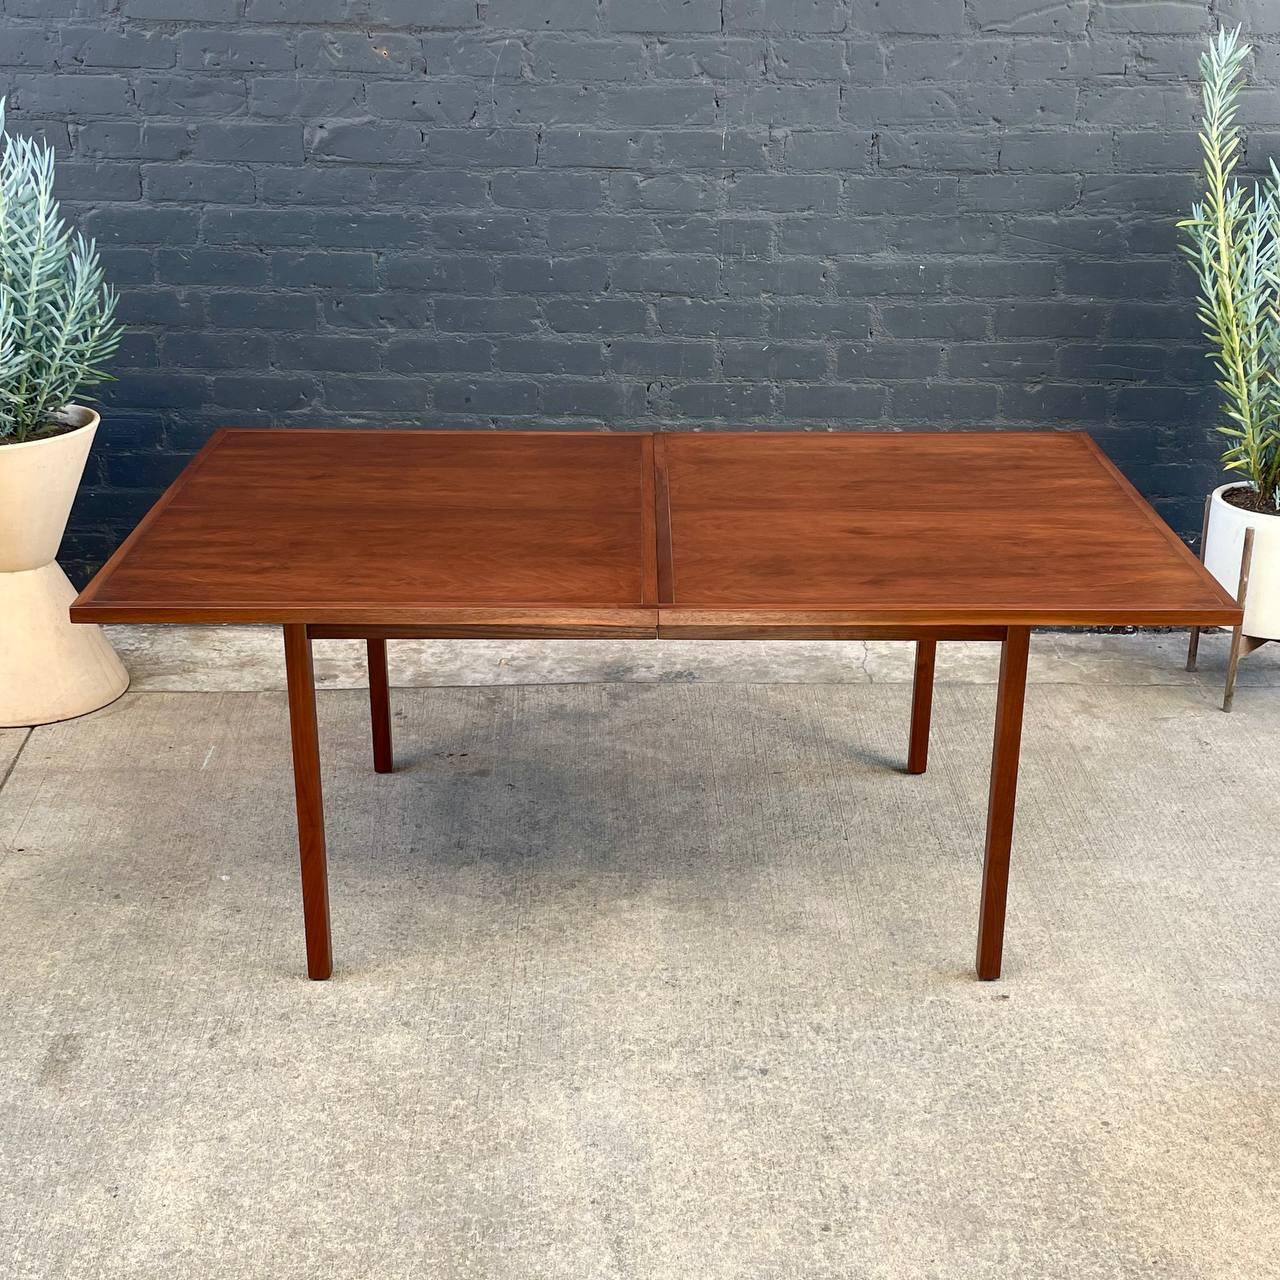 Mid-20th Century Newly Refinished Expanding Mid-Century Modern Walnut Dining Table, Milo Baughman